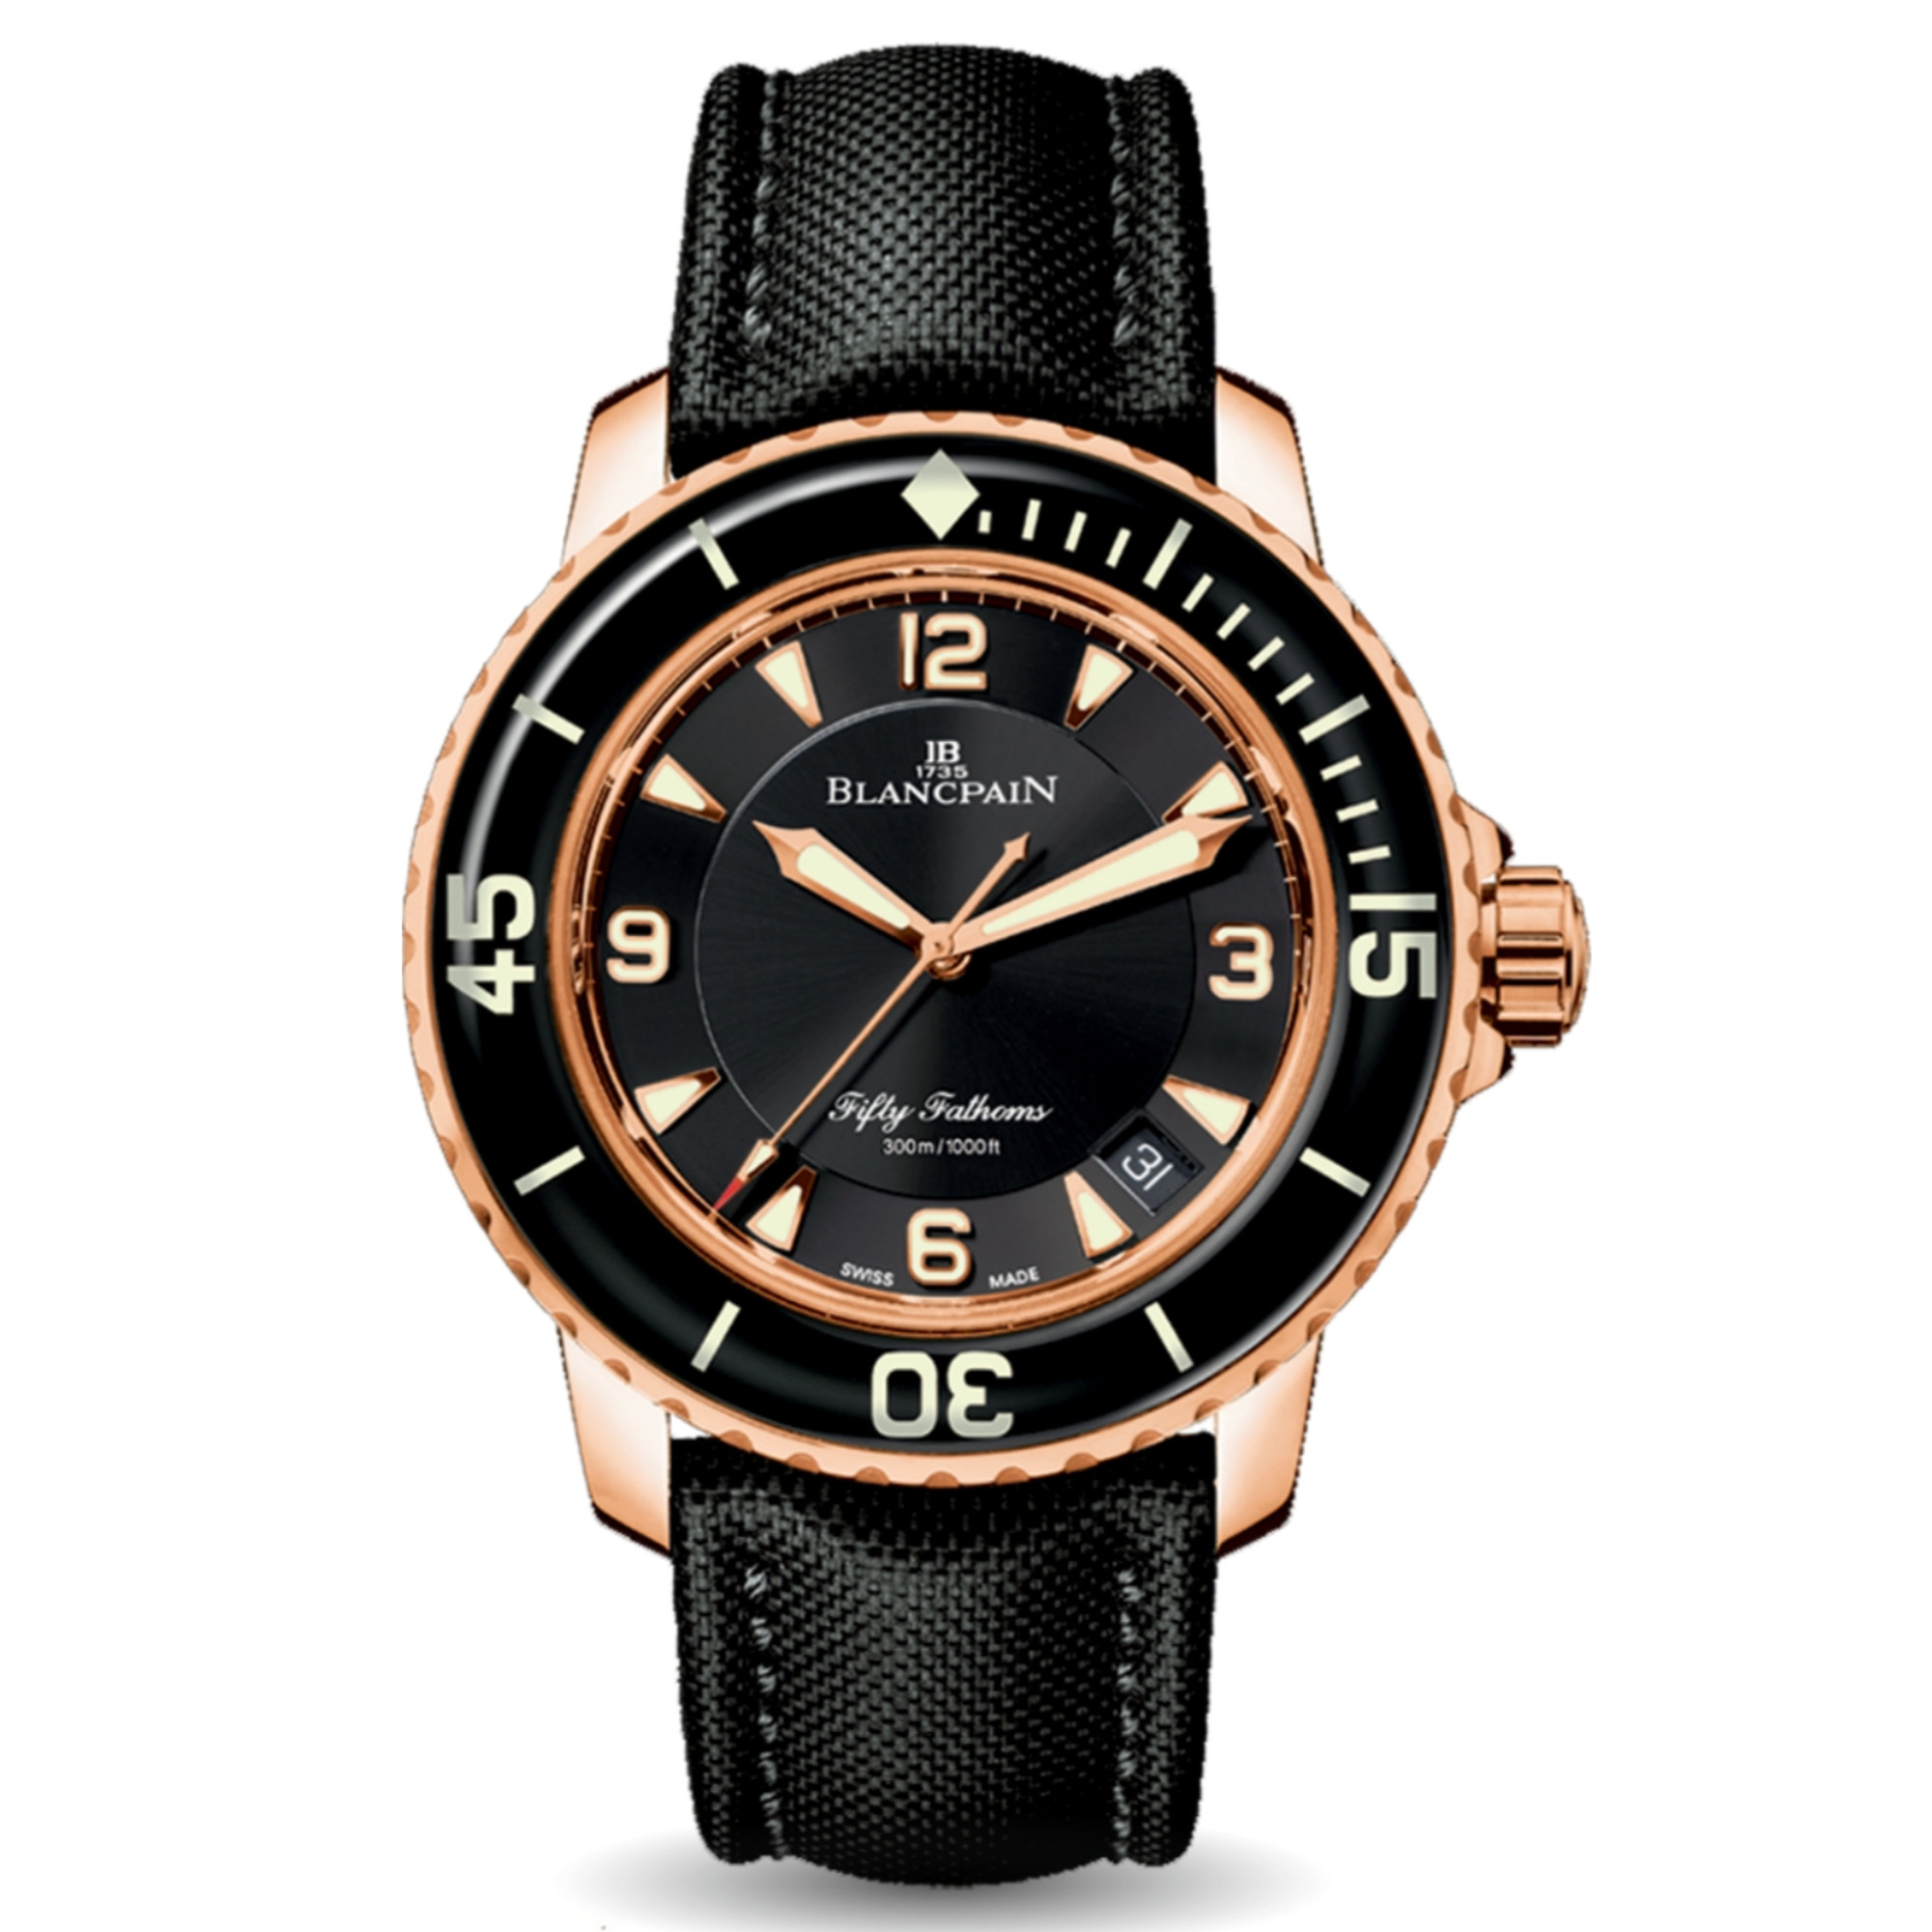 New Blancpain Fifty Fathoms Automatique Black Dial Rose Gold on Cloth Strap